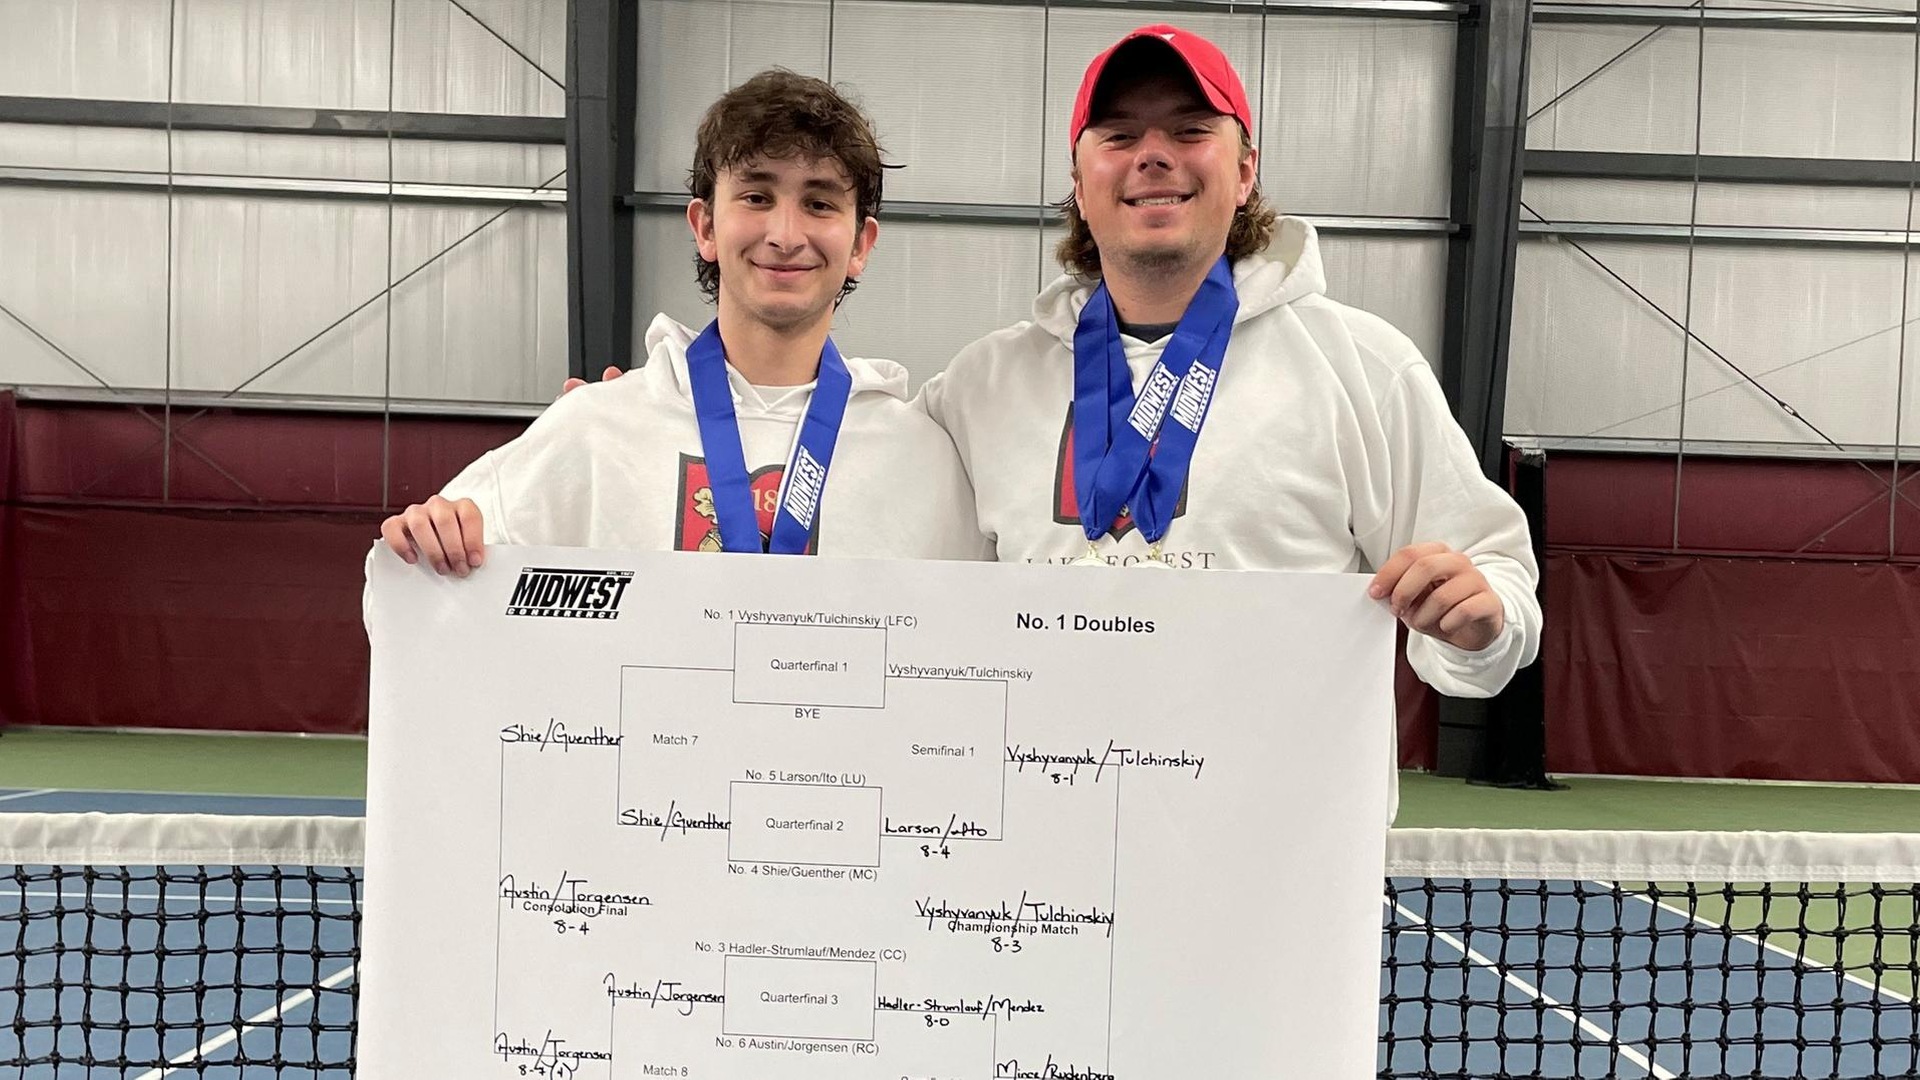 Foresters Claim MWC Title at #1 Doubles, Add Pair of Runner-Up Finishes